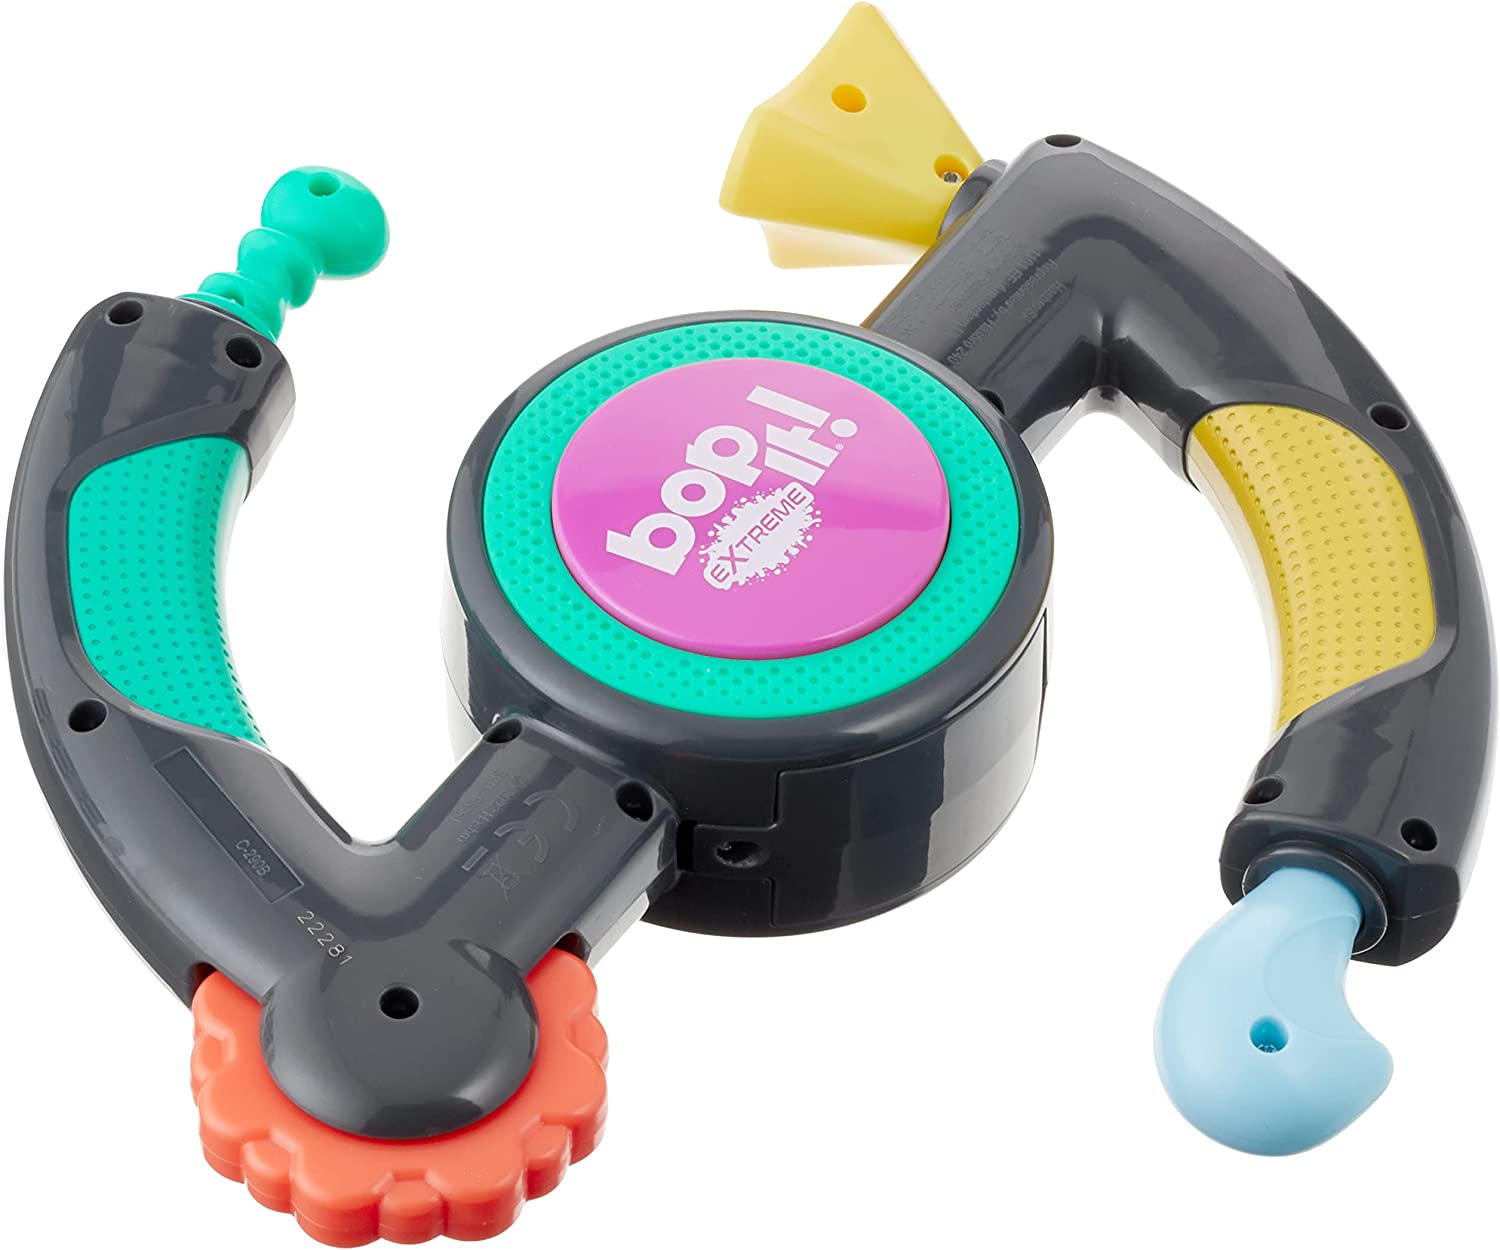 Hasbro Bop It! Extreme Electronic Game for 1 or More Players, Fun Party Game for Kids Ages 8+, 4 Modes Including One-On-One Mode, Interactive audible Game great for players who are blind or low vision.